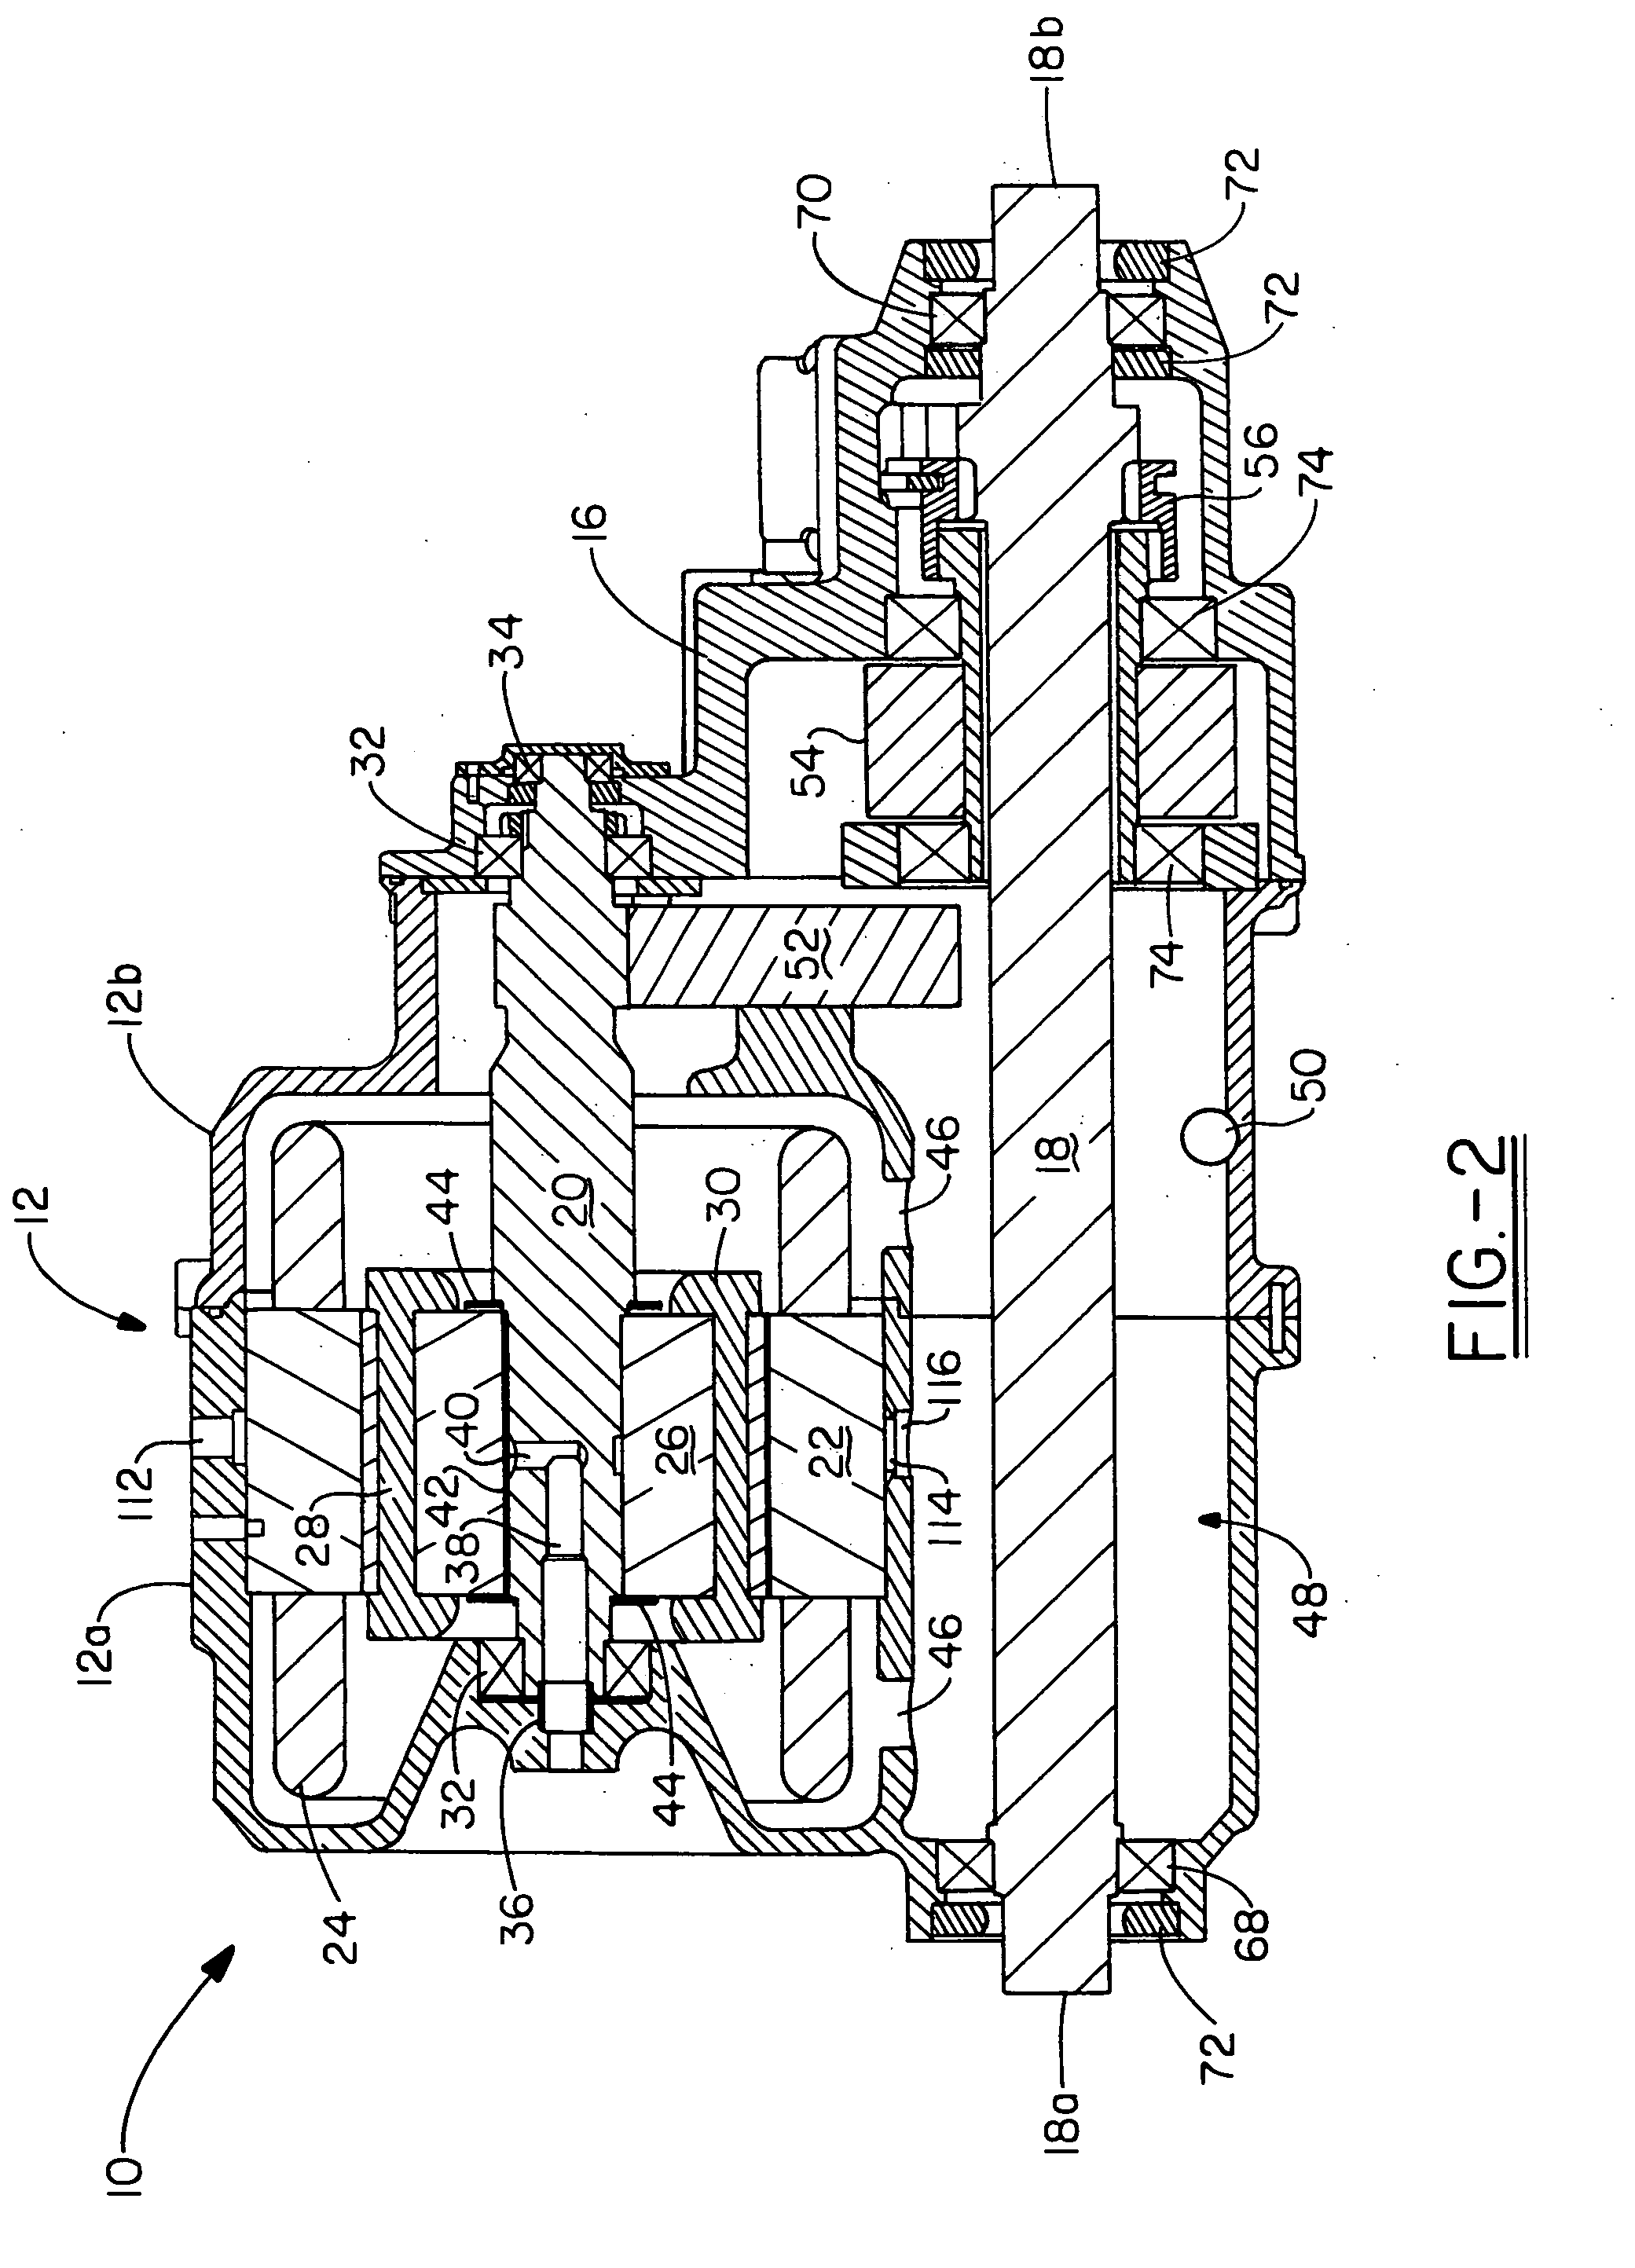 Oil cooled electric drive module for hybrid vehicles